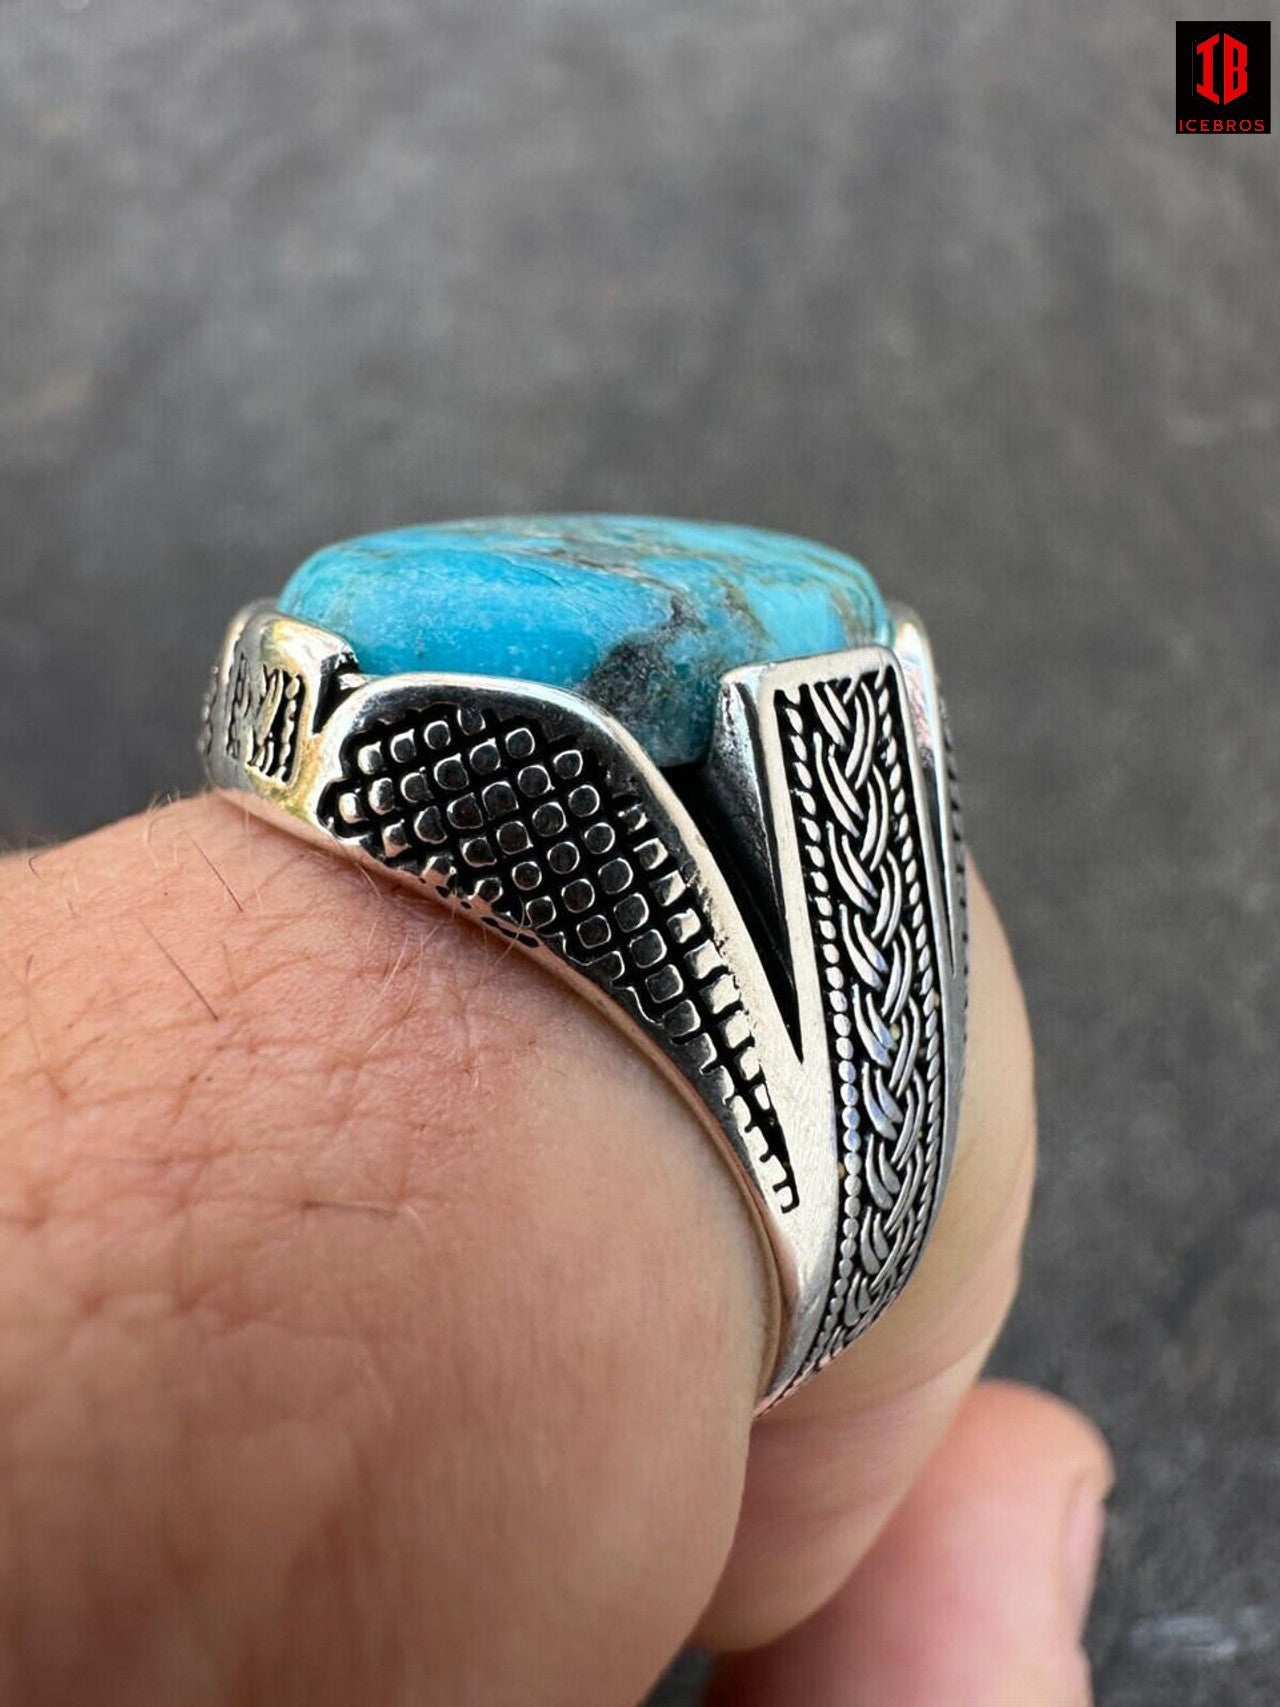 A man's hand showcasing two rings adorned with blue turquoise stones, exuding elegance and style.